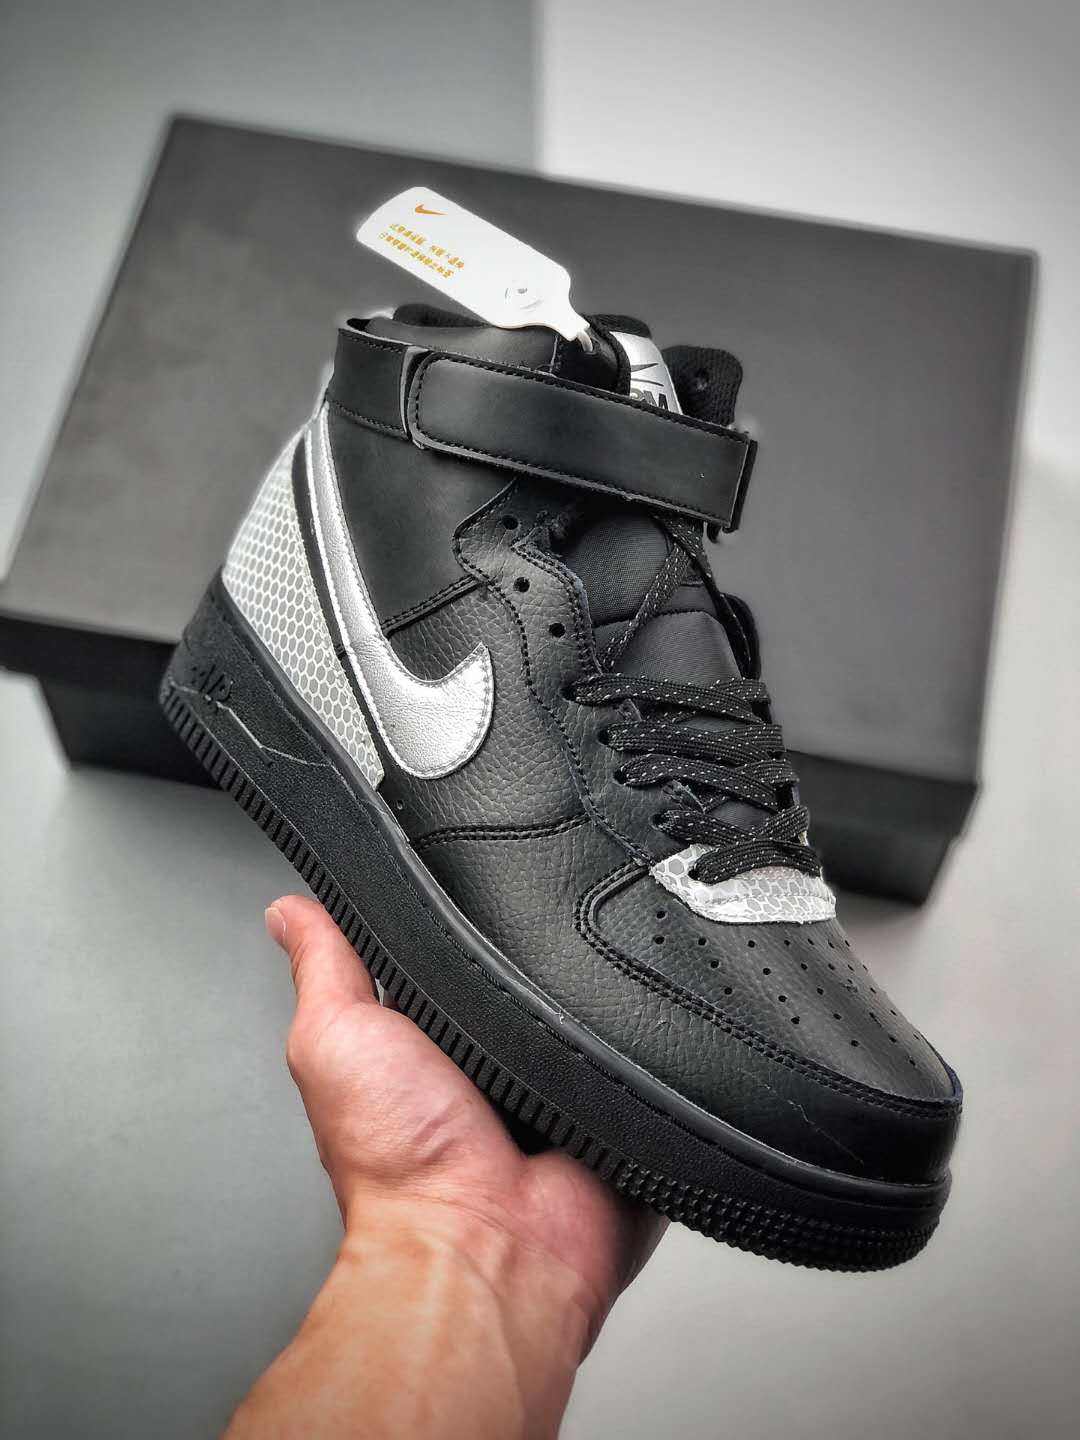 Nike 3M Air Force 1 High 'Black' CU4159-001 - Stylish and Reflective Sneakers | Limited Edition